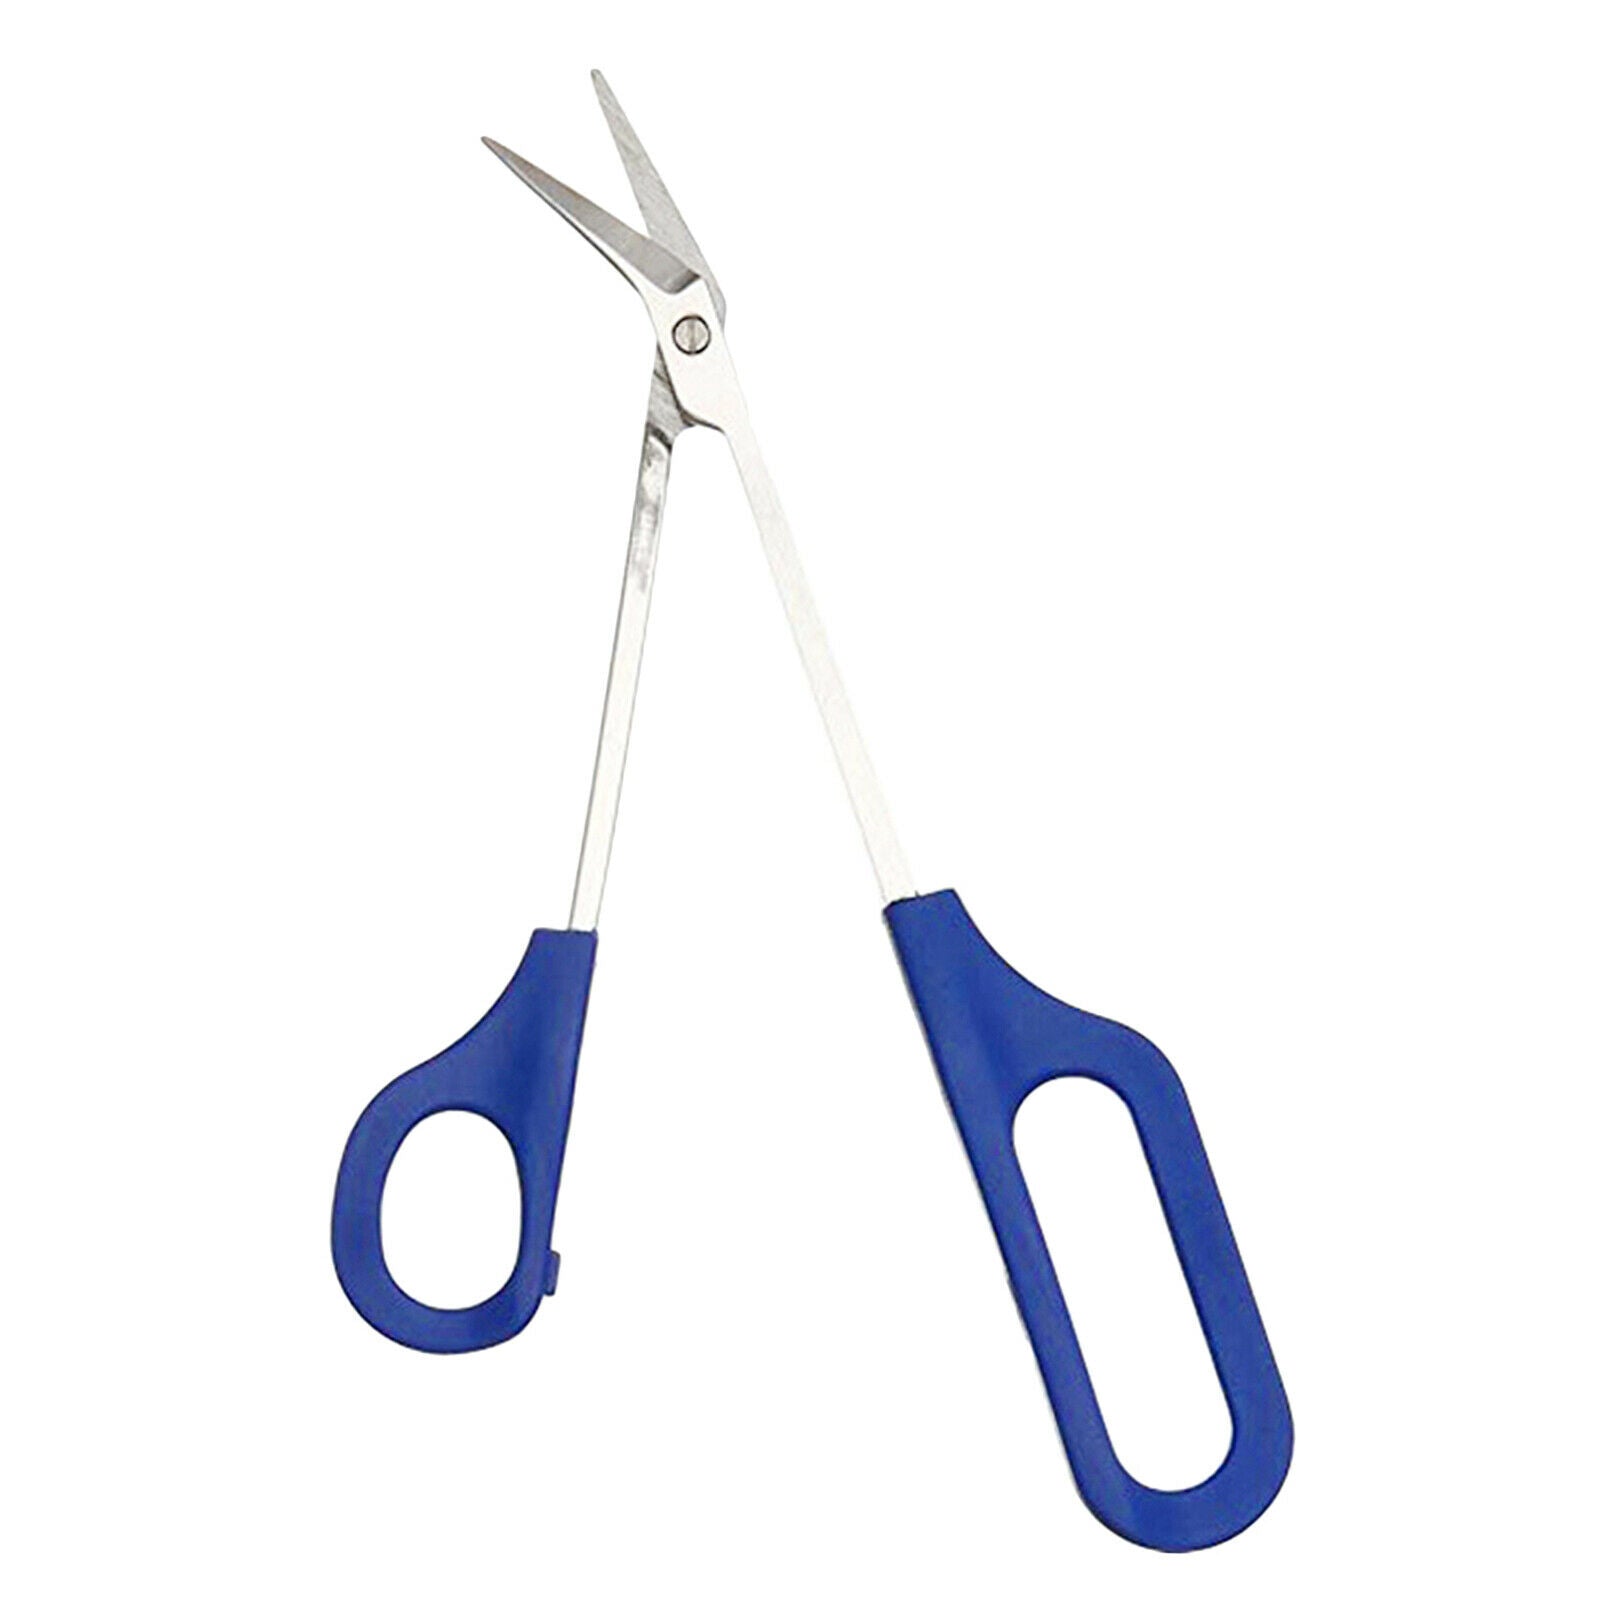 Toe Nail Scissors Clippers Extra Long Reach Handle Pedicure Product Blue